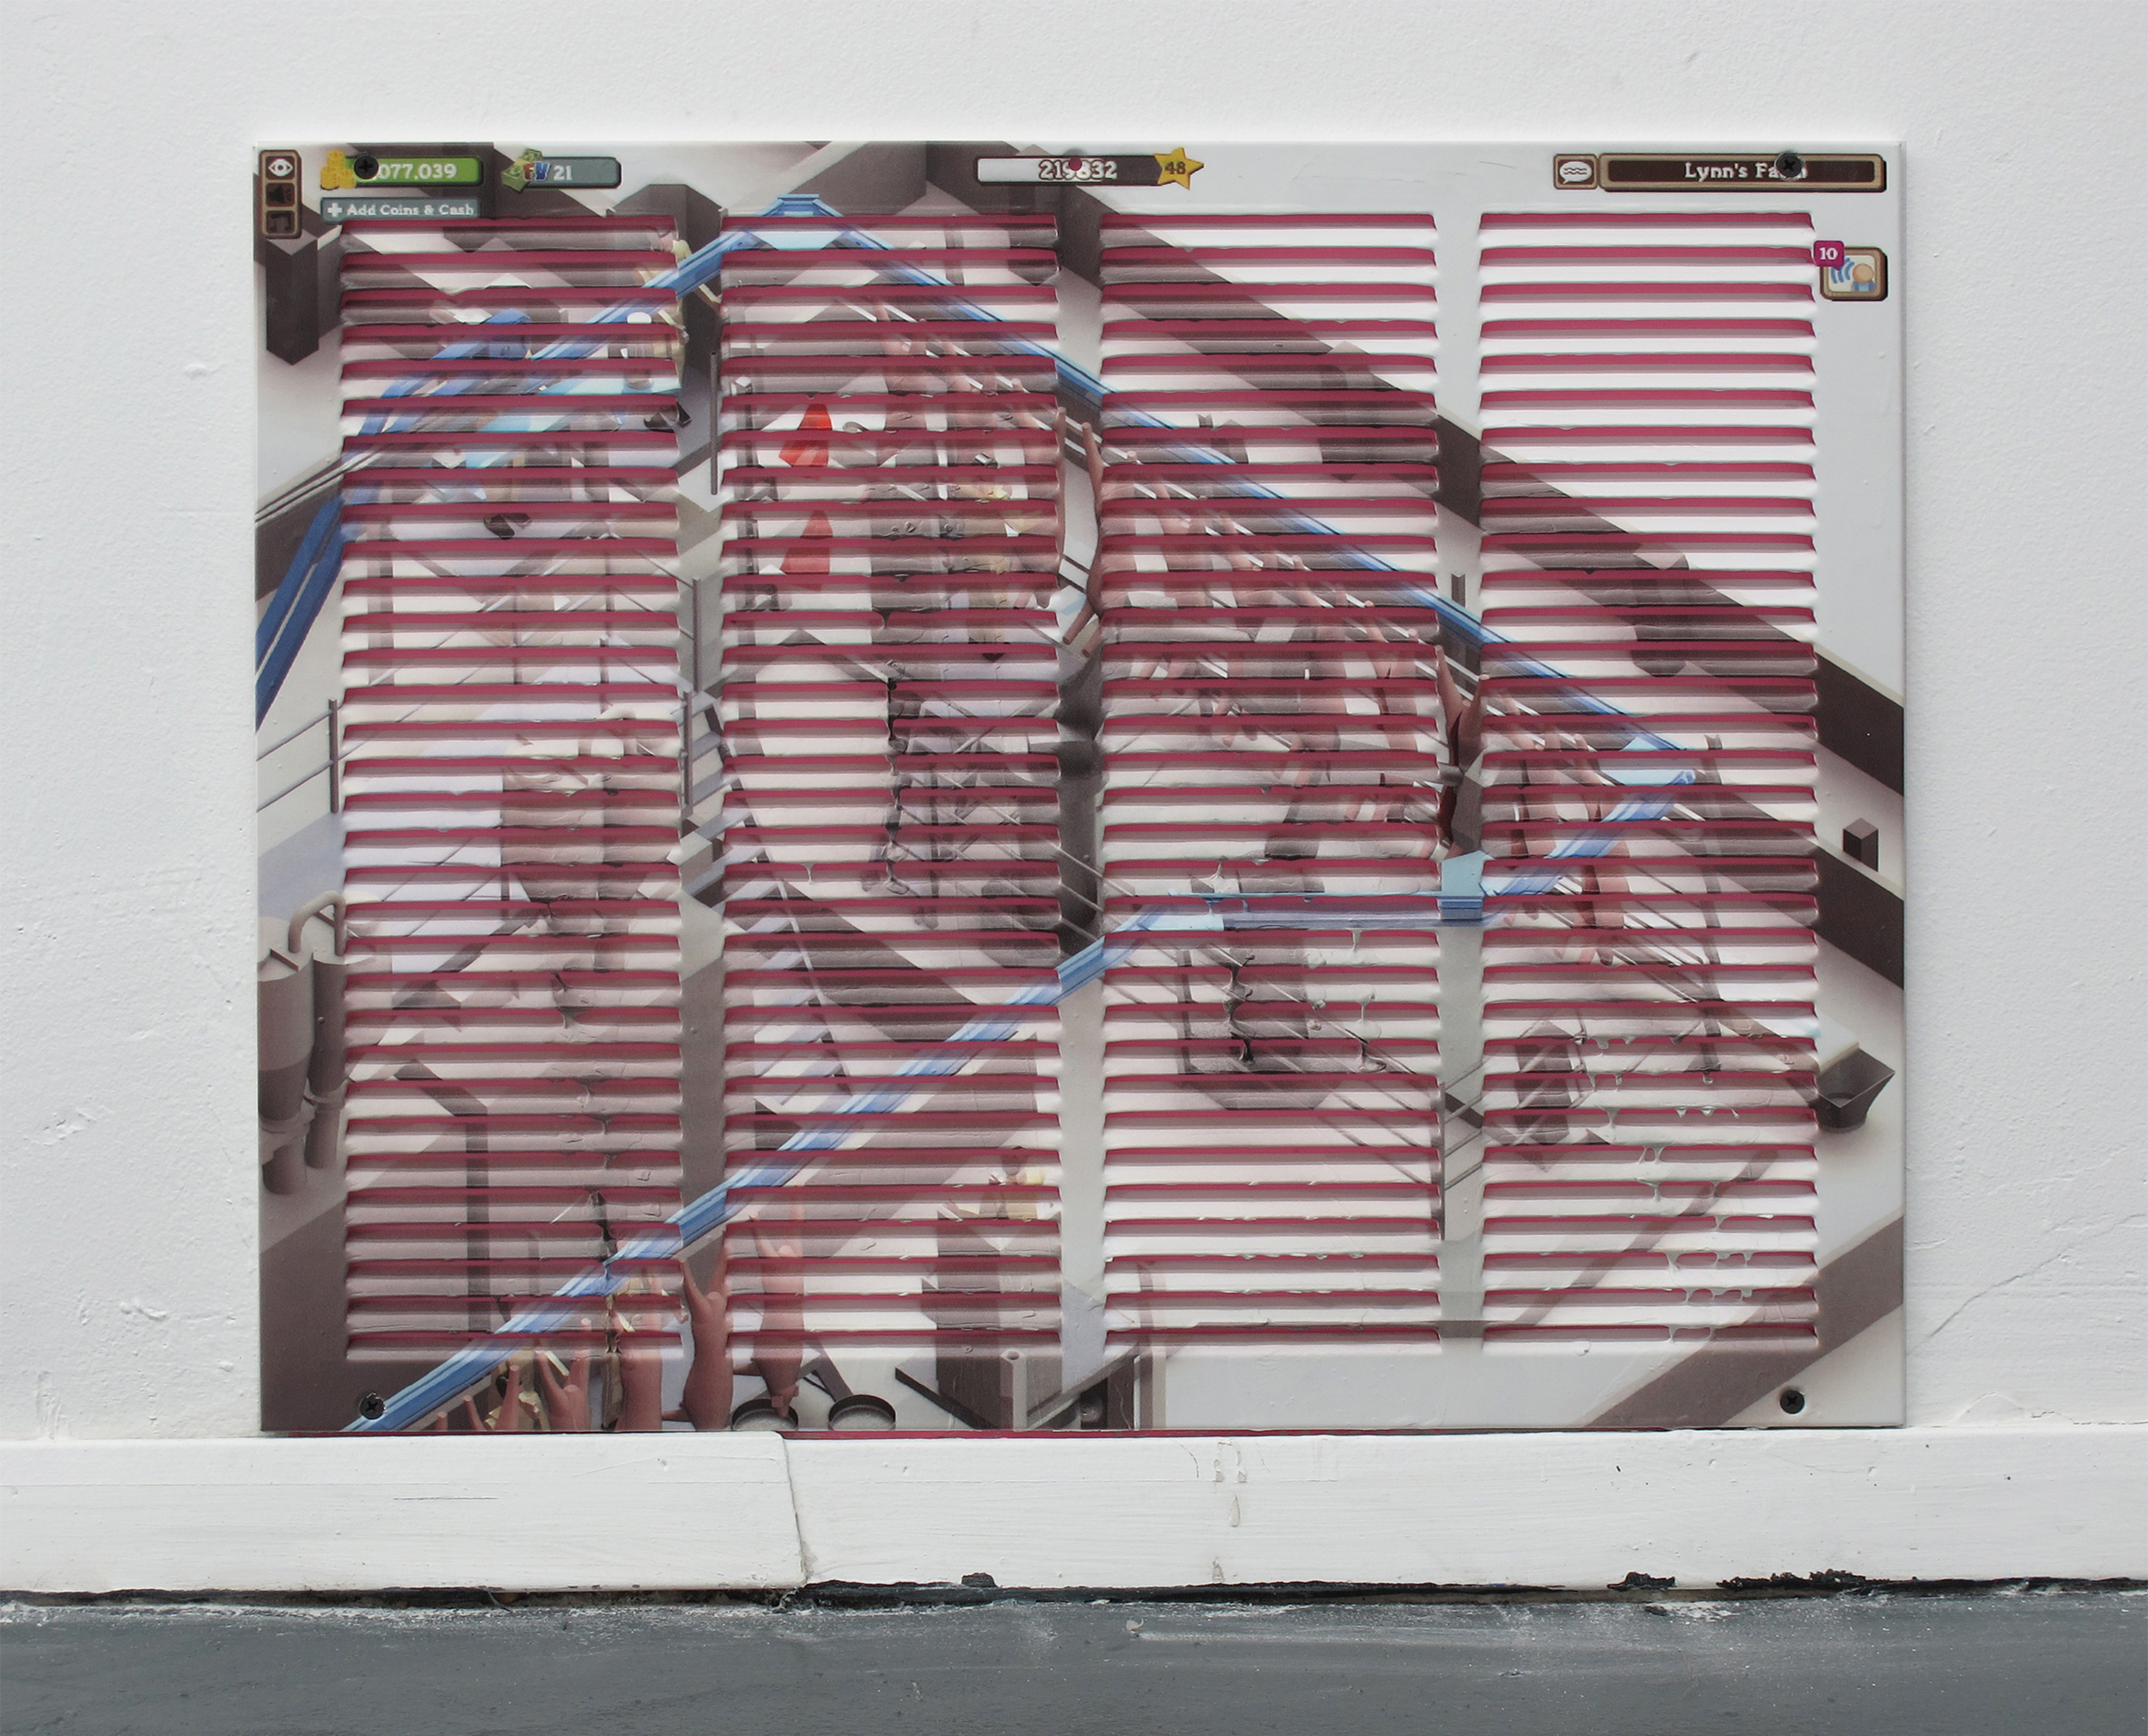  Michael Assiff,  Vent (Automated Slaughter House) , 2015,&nbsp;inkjet print and latex on powder coated steel,&nbsp;21.75 x 21.75 inches 